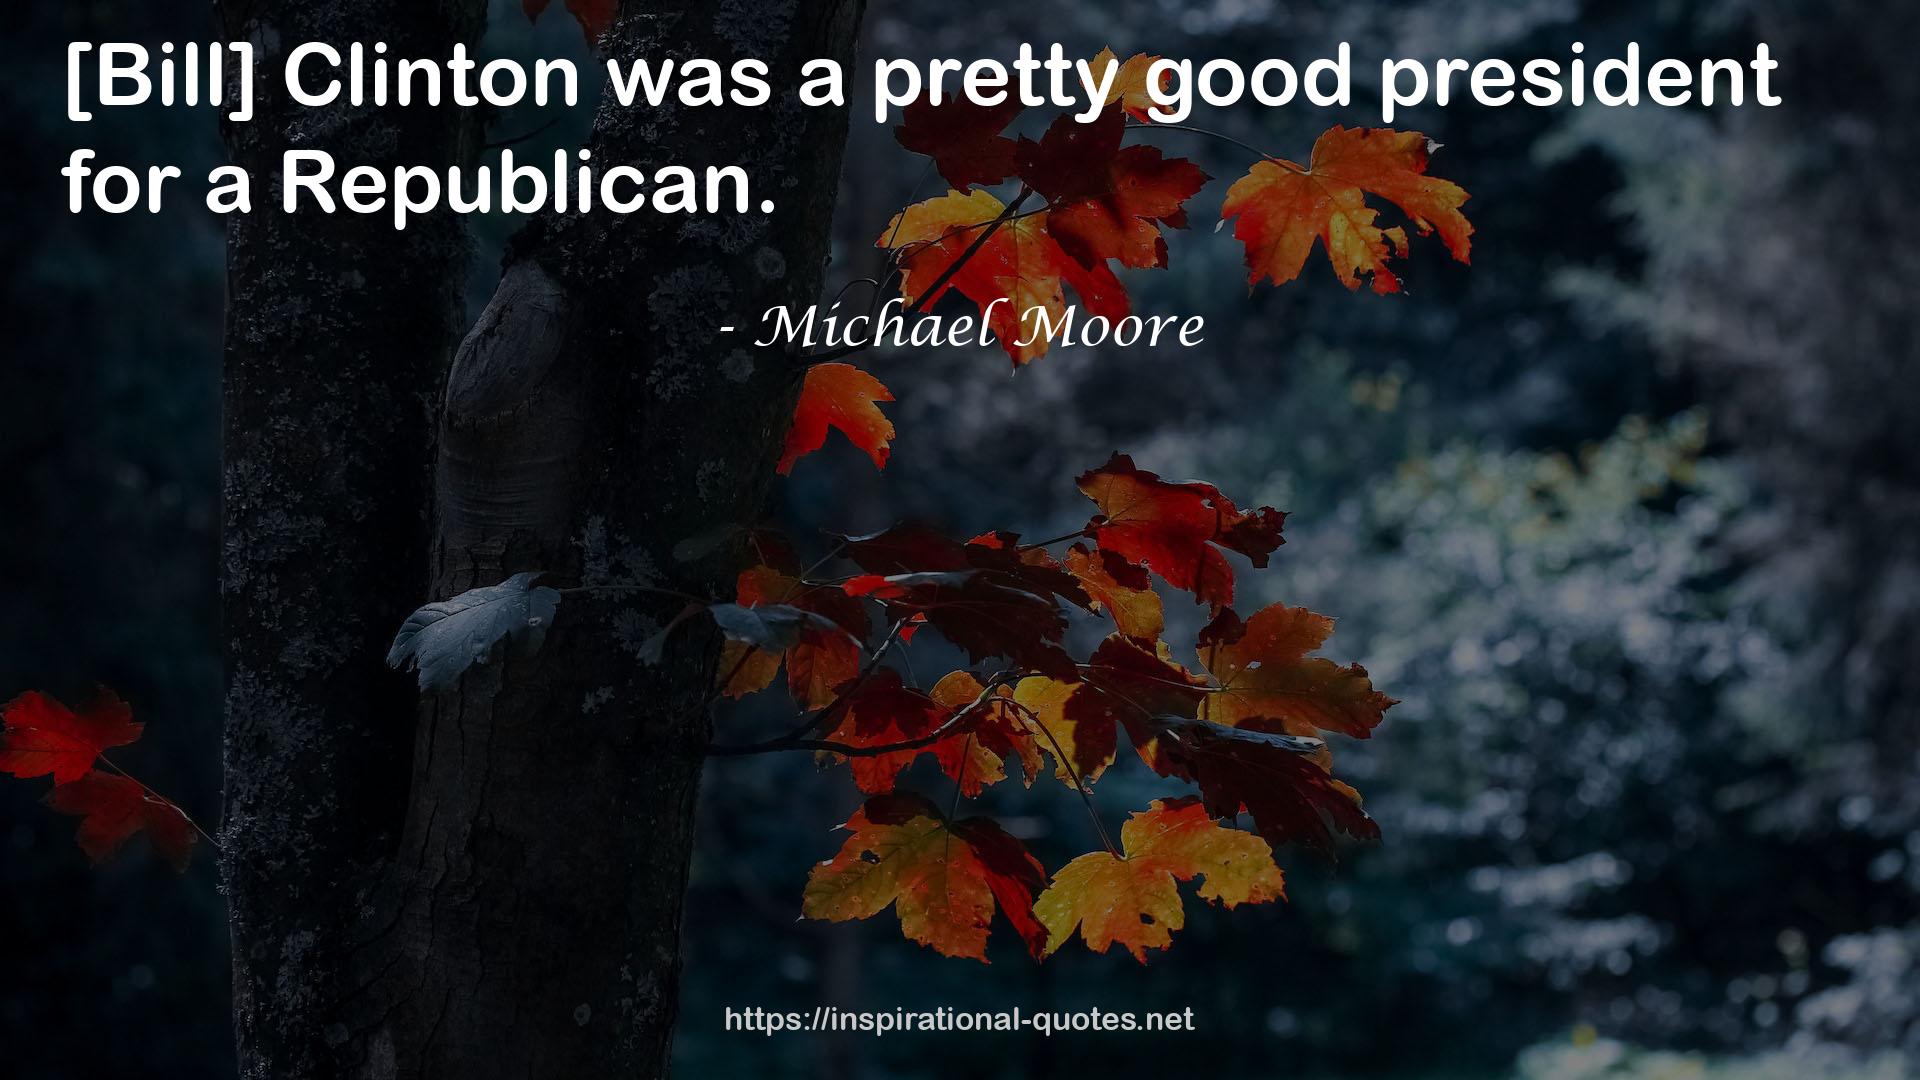 Michael Moore QUOTES